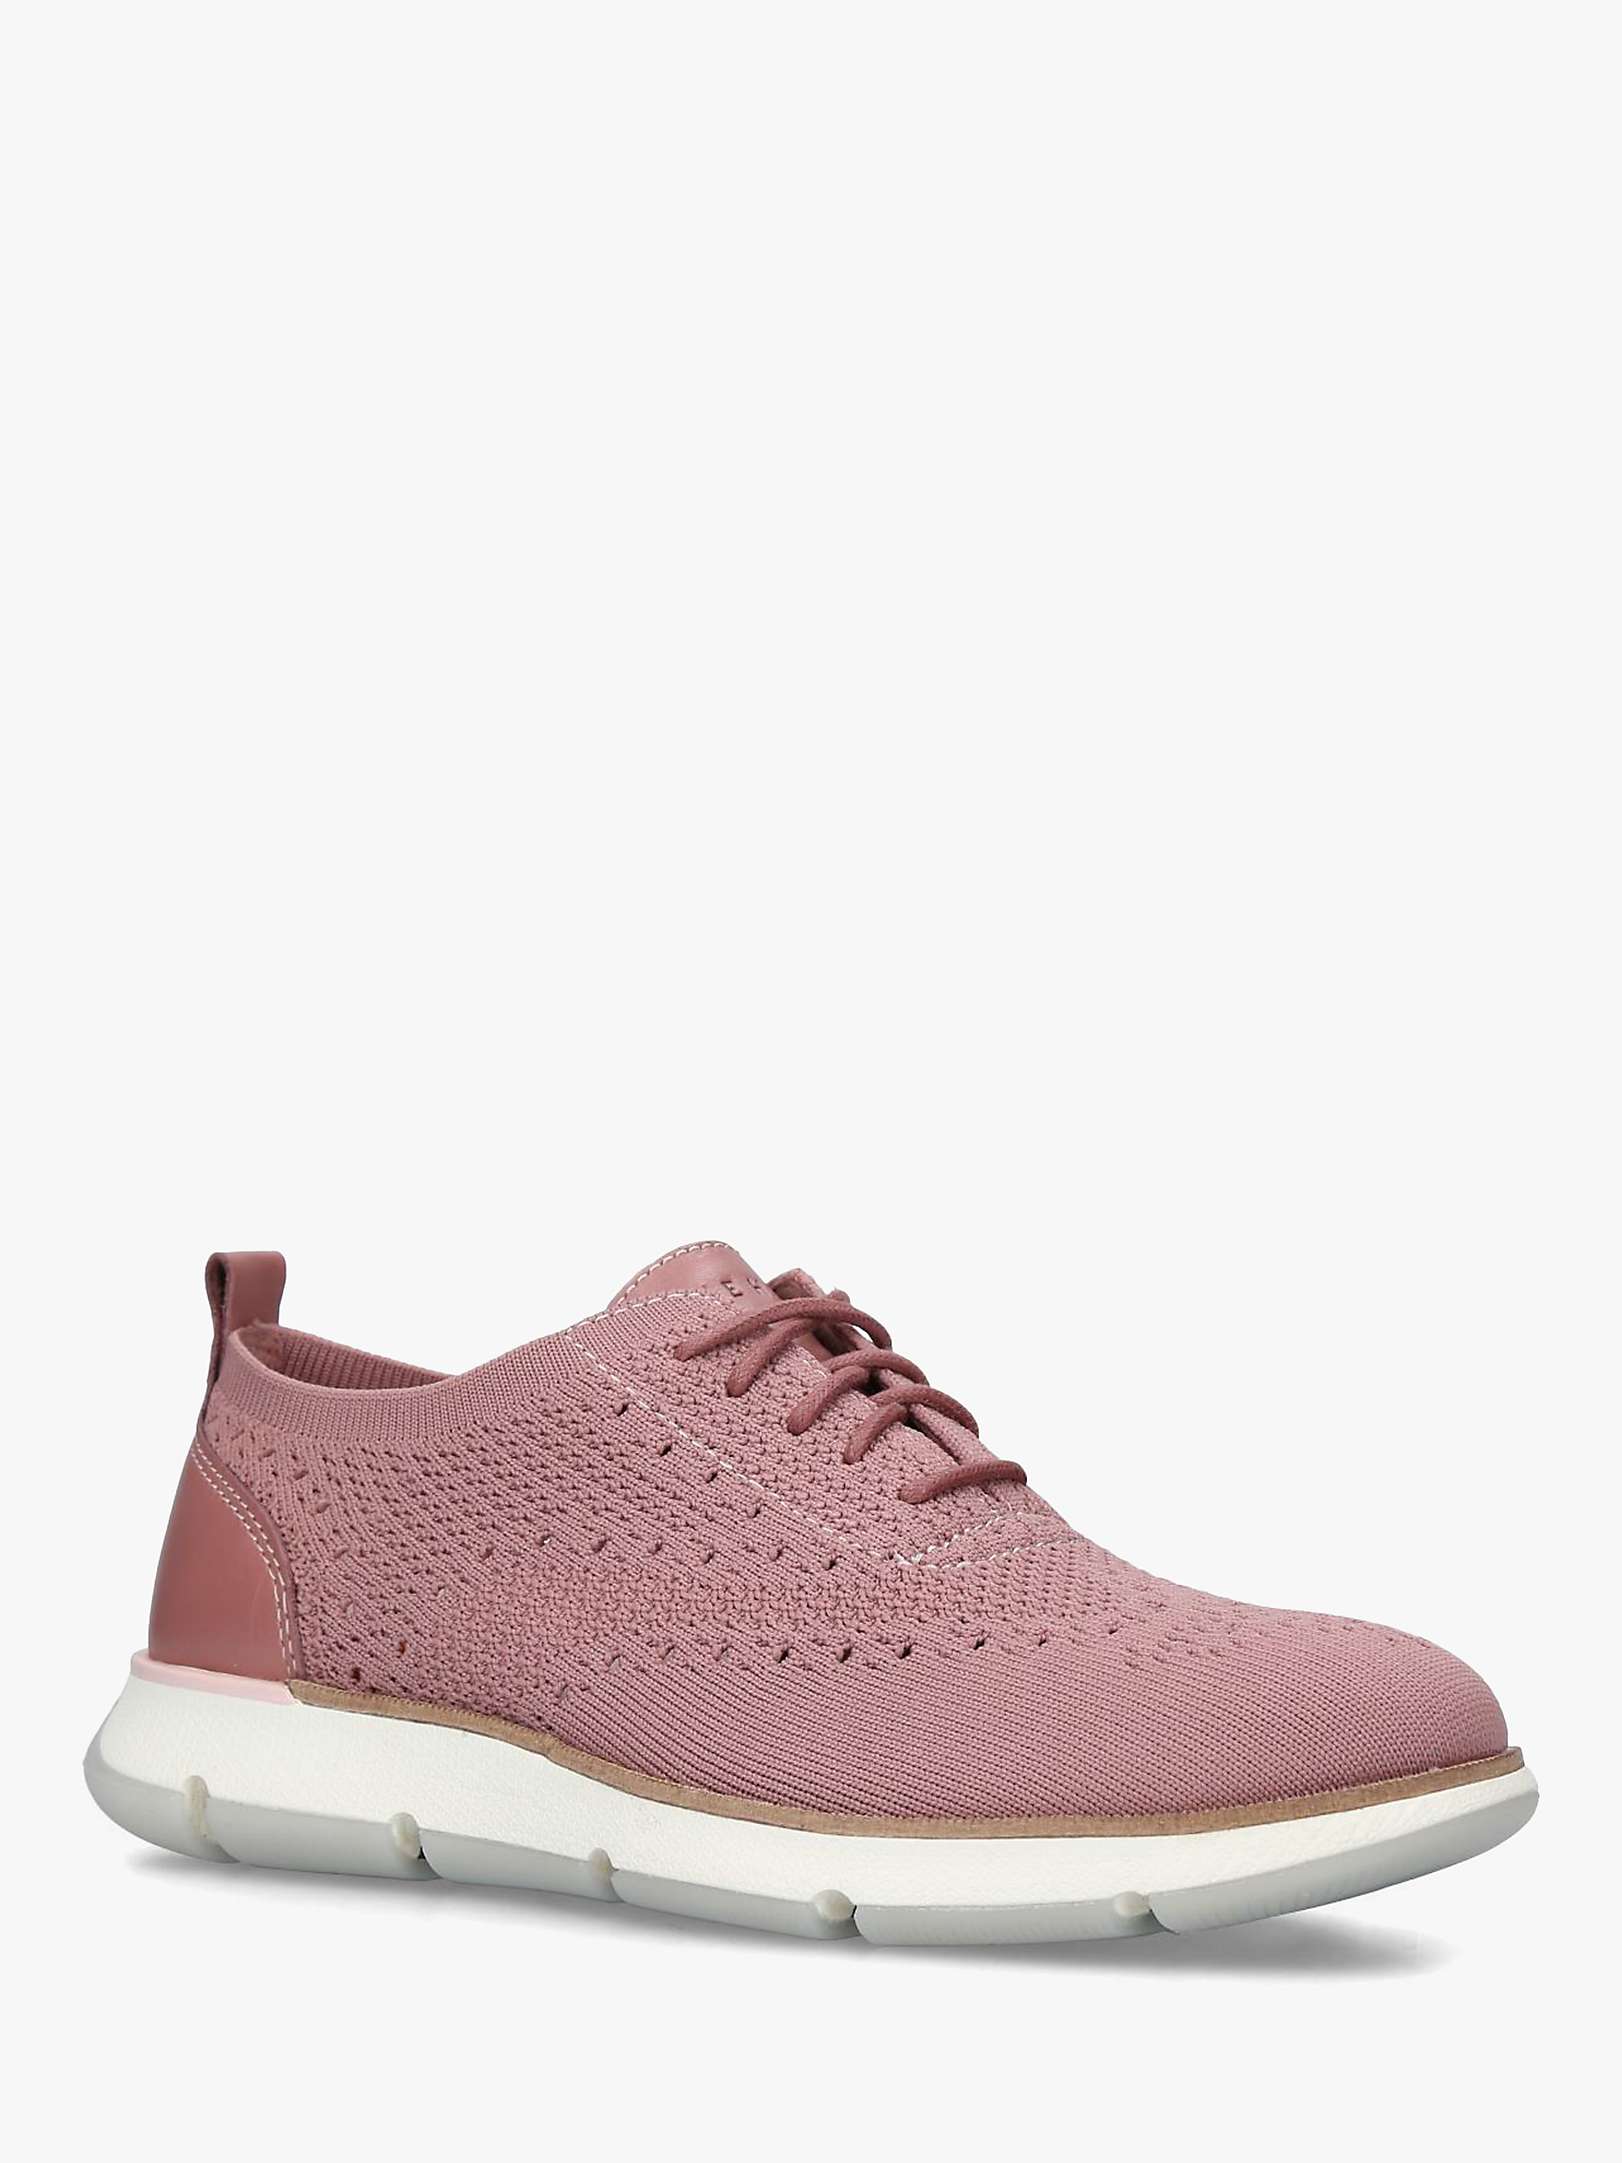 Buy Cole Haan 4 Zerogrand Lace Up Fabric Trainers Online at johnlewis.com